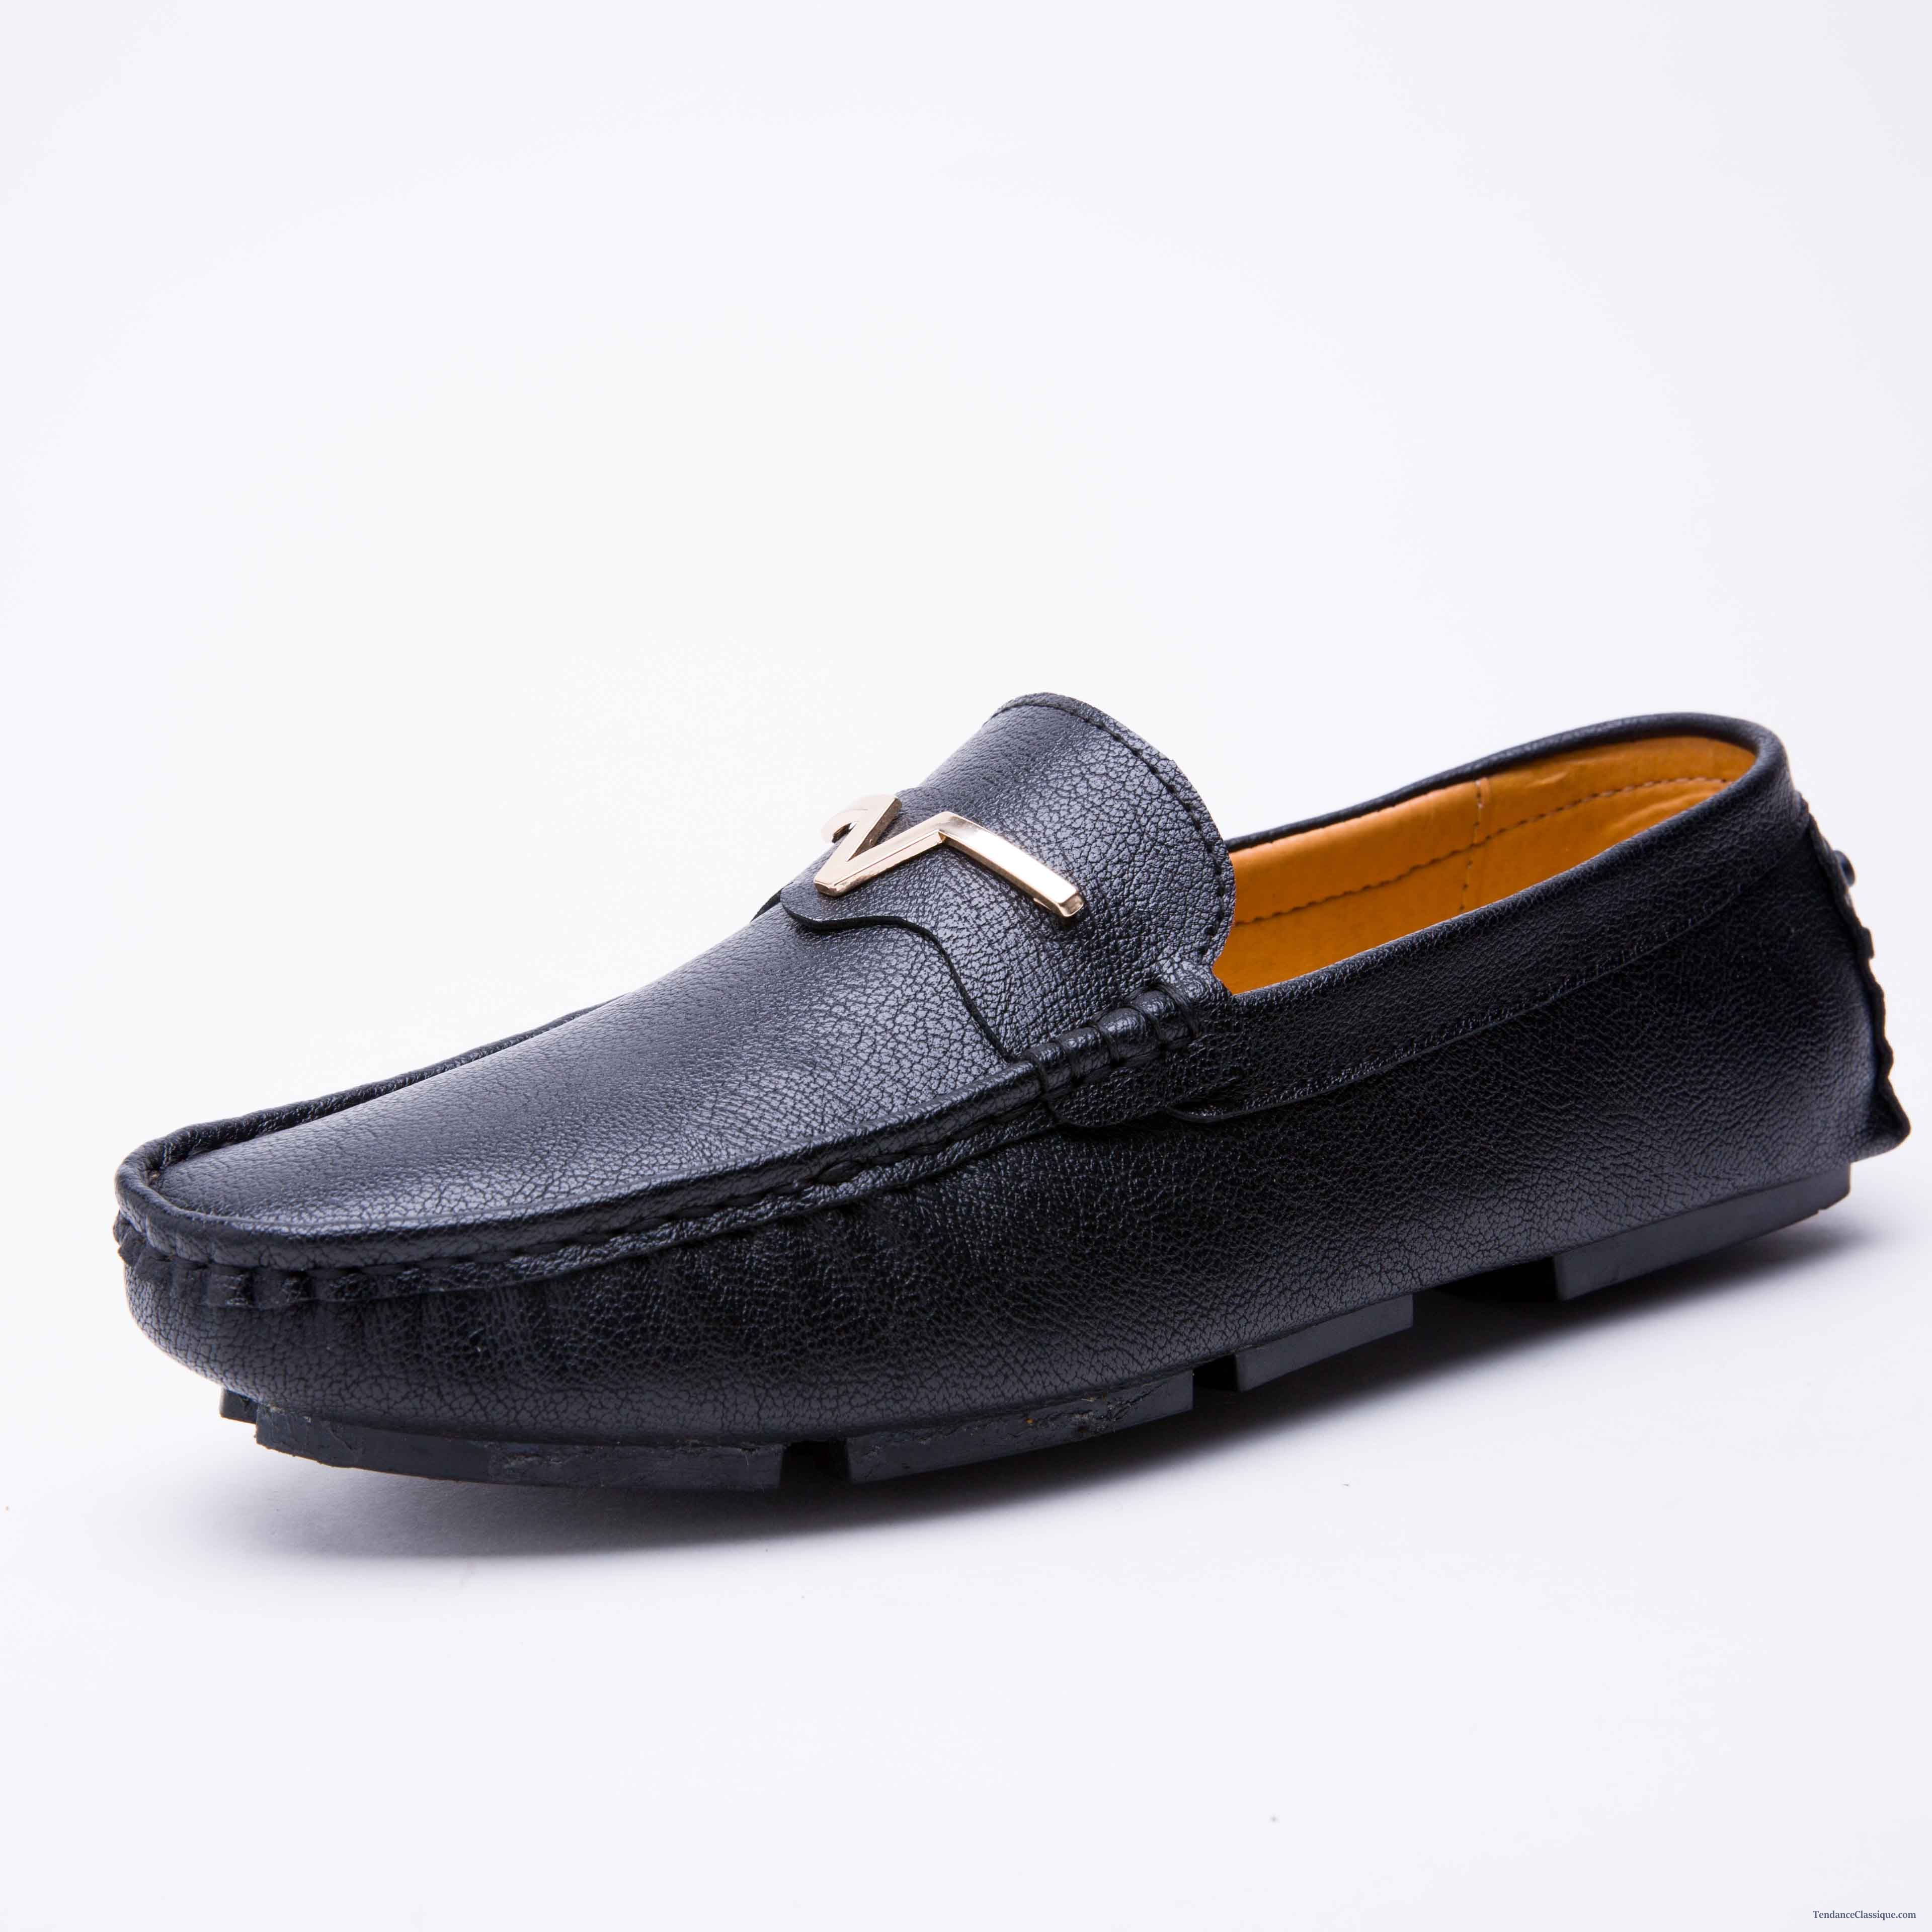 Chaussure Homme Original, Mocassin Luxe Homme